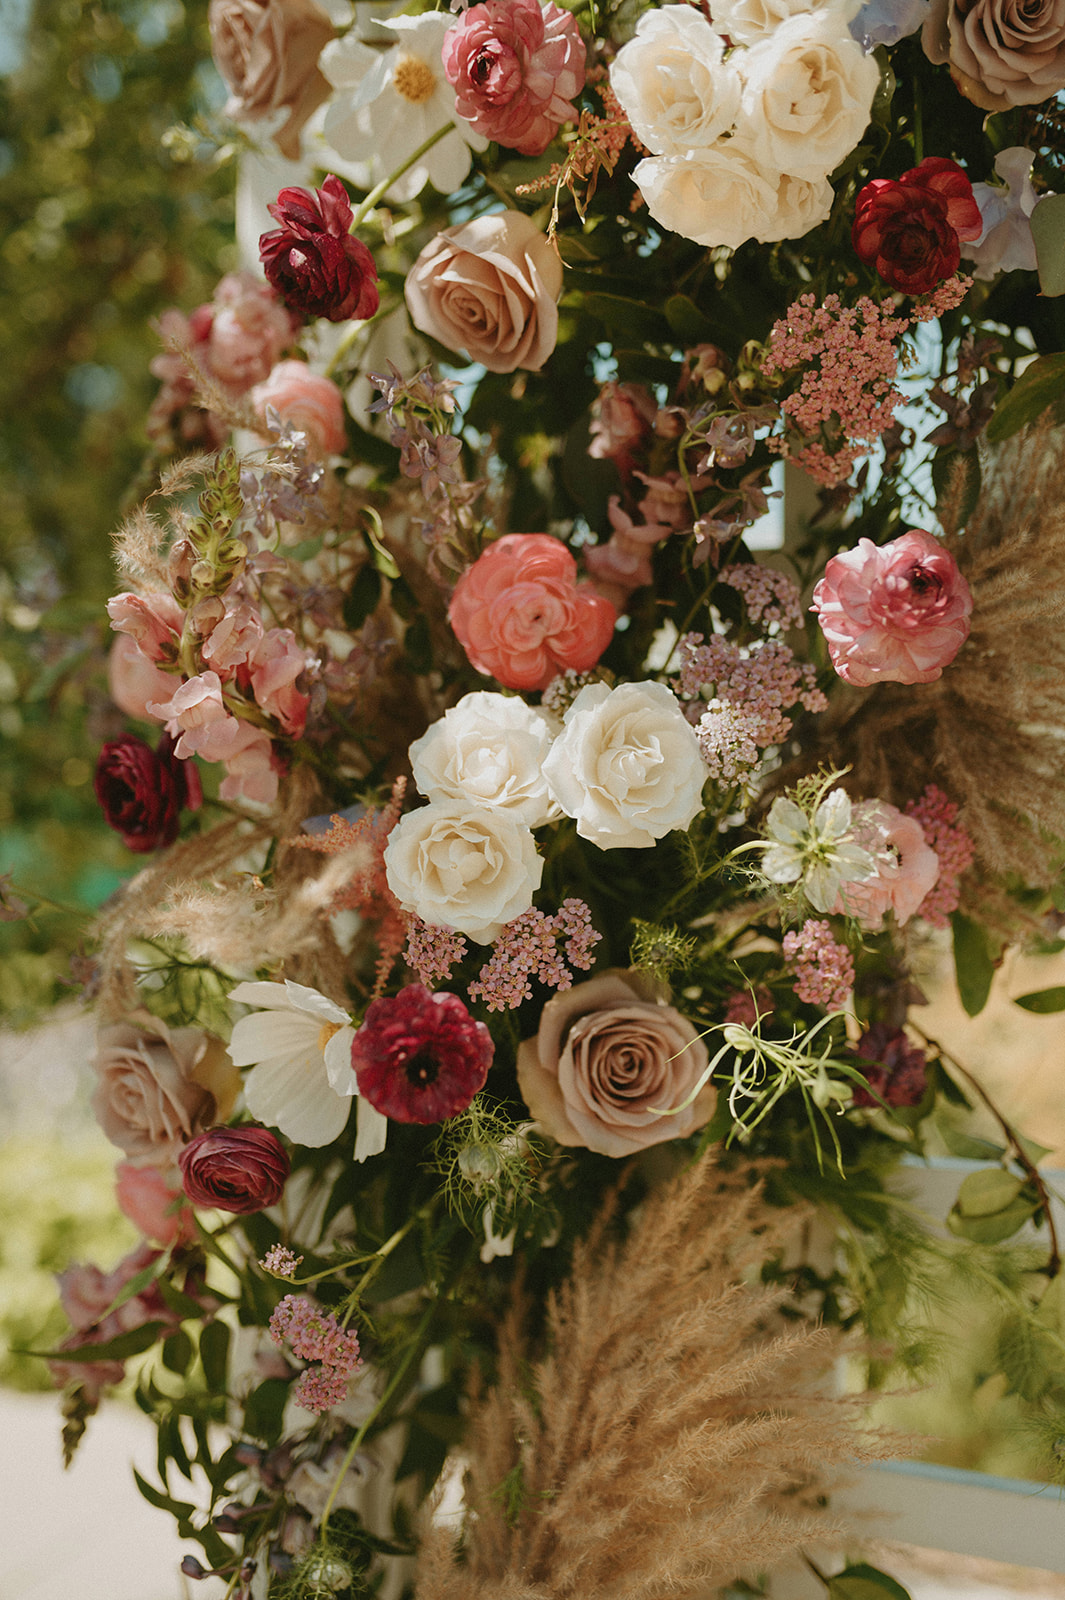 Blush, berry and gold floral inspiration for a floral arch installation